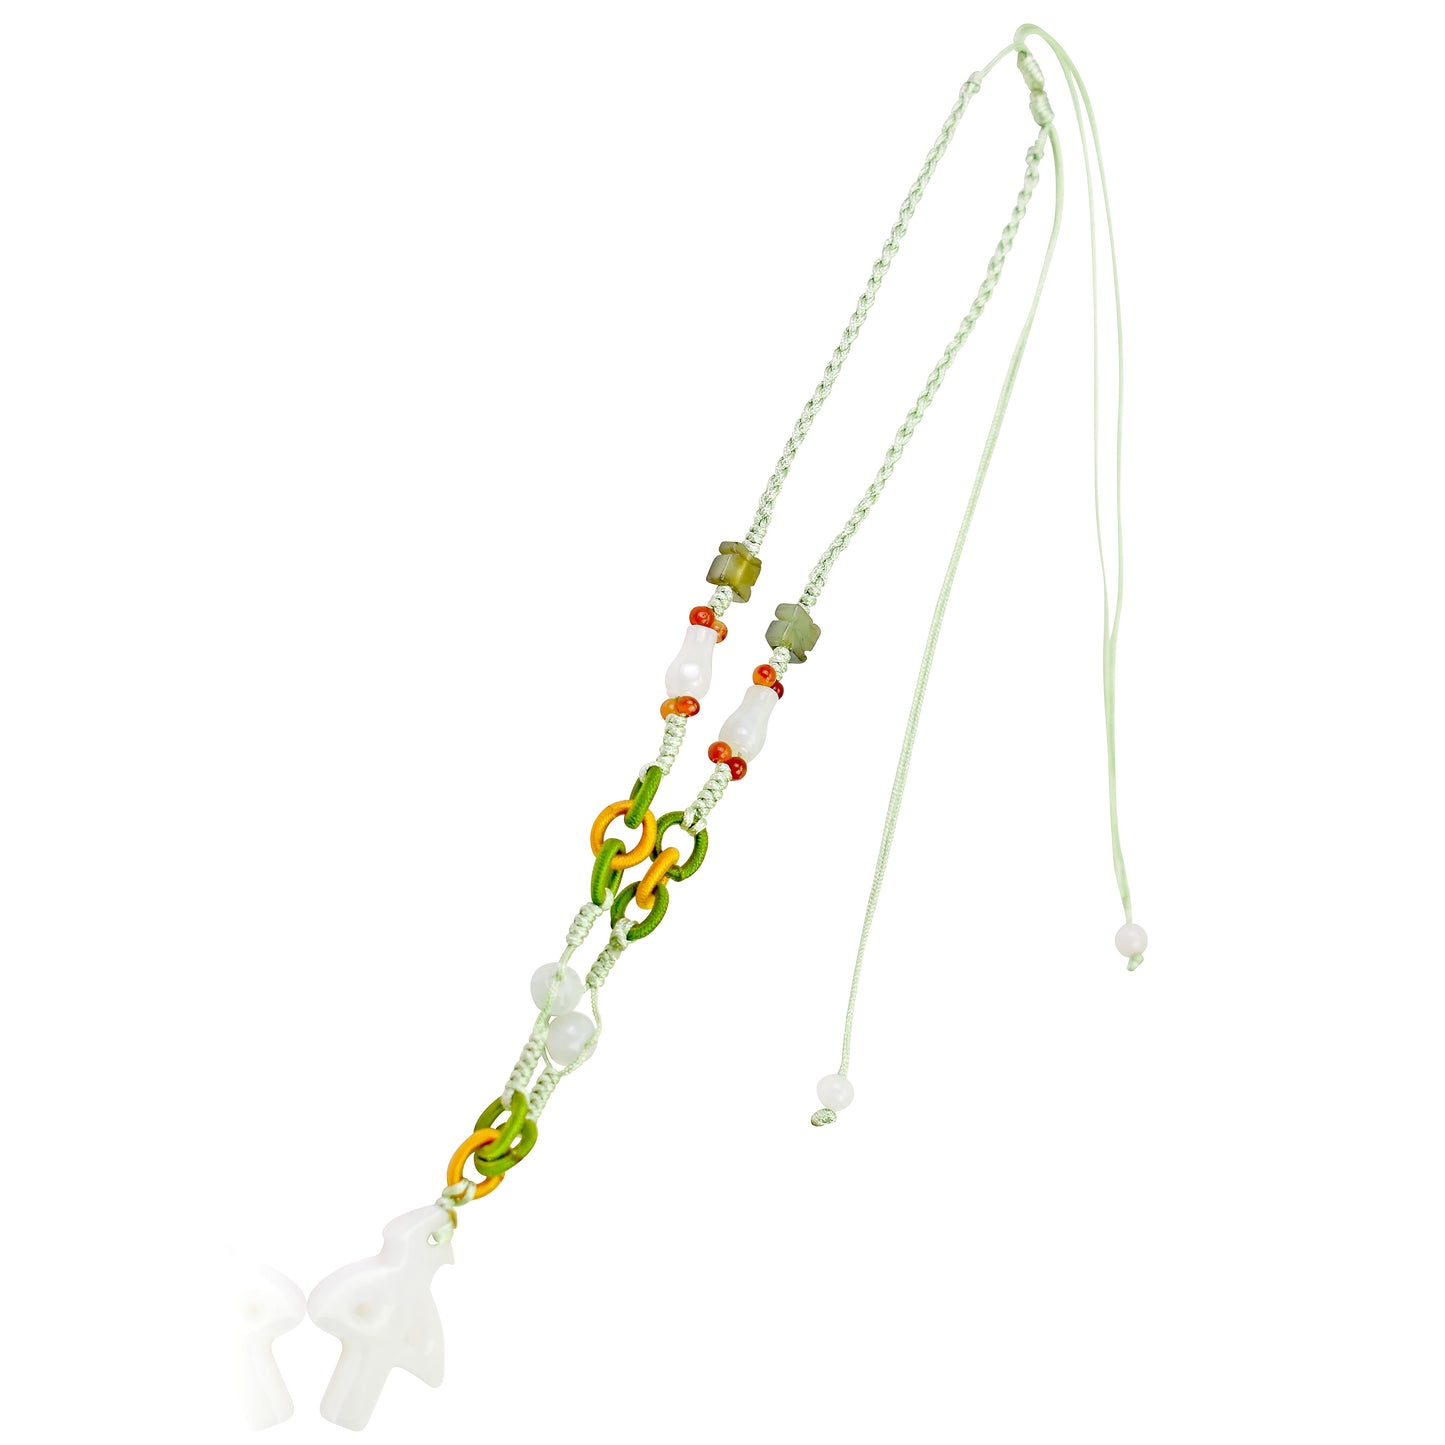 Let Your Sagittarius Side Shine with a Handmade Jade Necklace made with Sea Green Cord